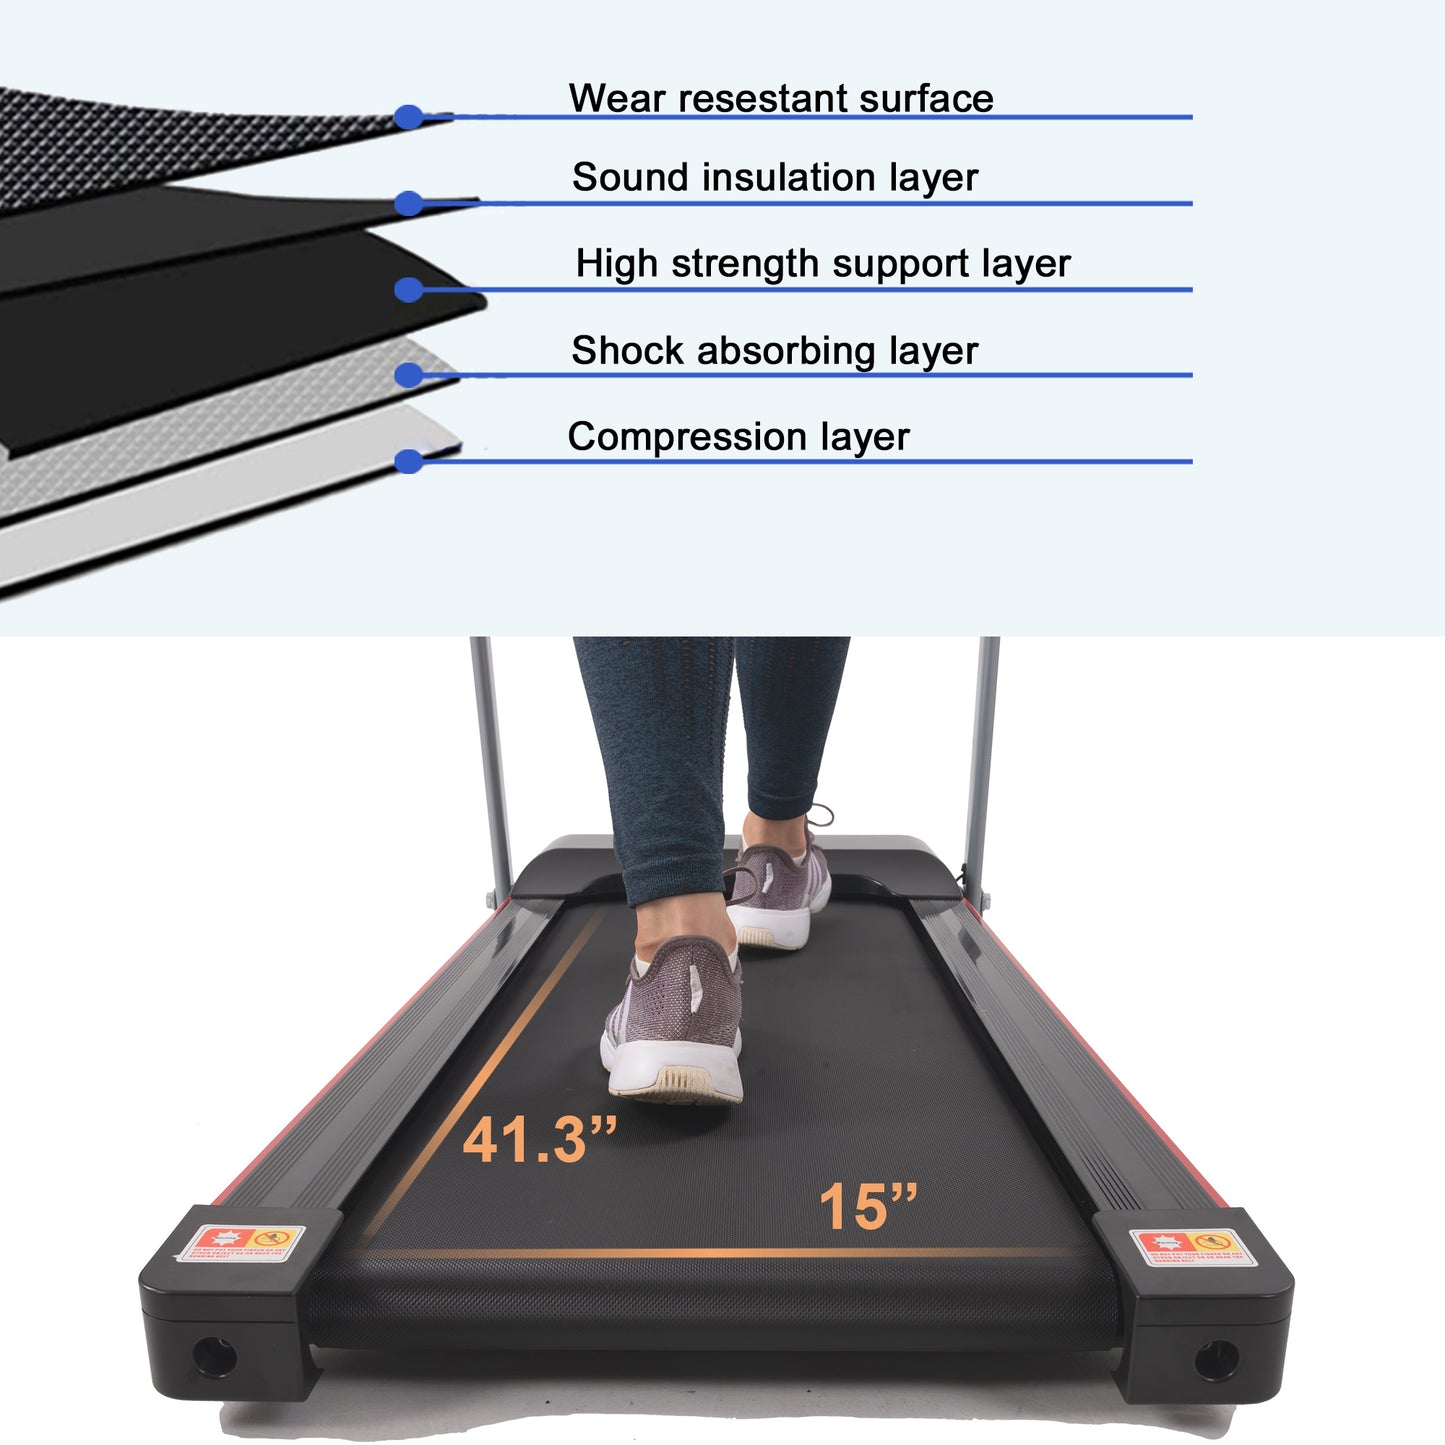 FYC Folding Treadmill for Home with Desk - 2.5HP Compact Electric Treadmill for Running and Walking Foldable Portable Running Machine for Small Spaces Workout;  265LBS Weight Capacity